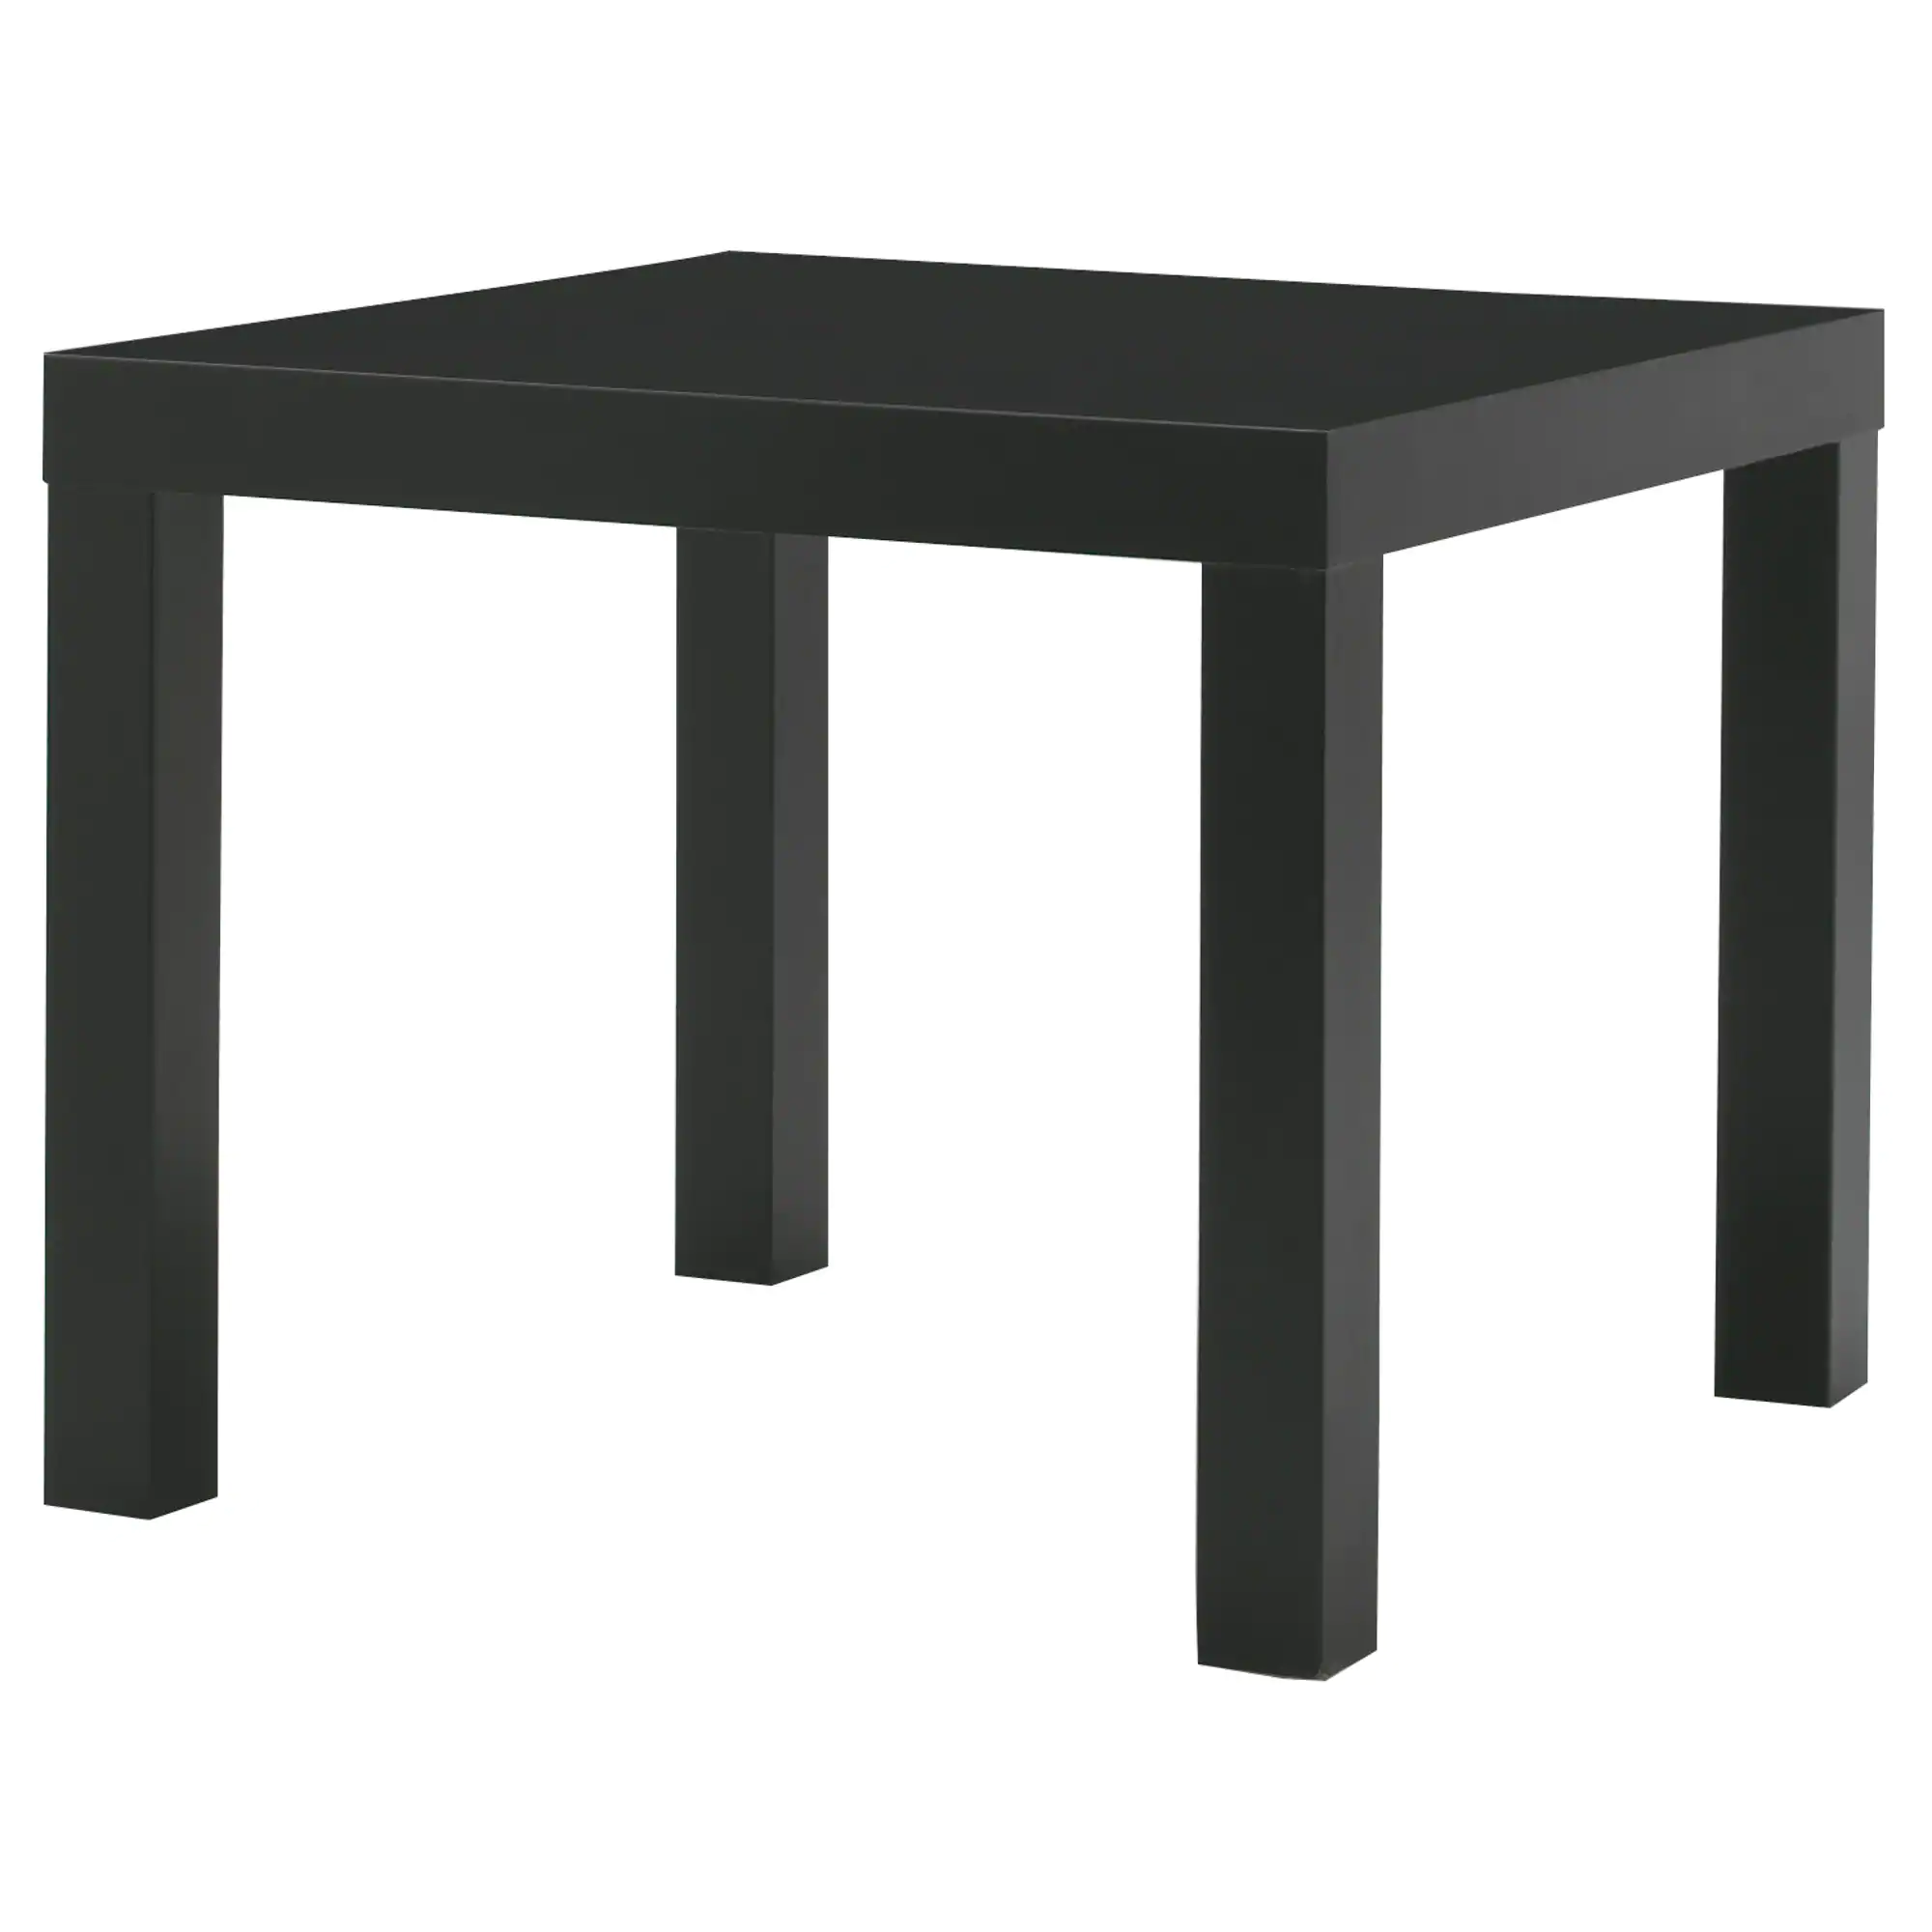 lack side table black ikea small accent home goods dining sets square coffee modern metal and glass bedside charging station pier one area rugs contemporary wood tables external